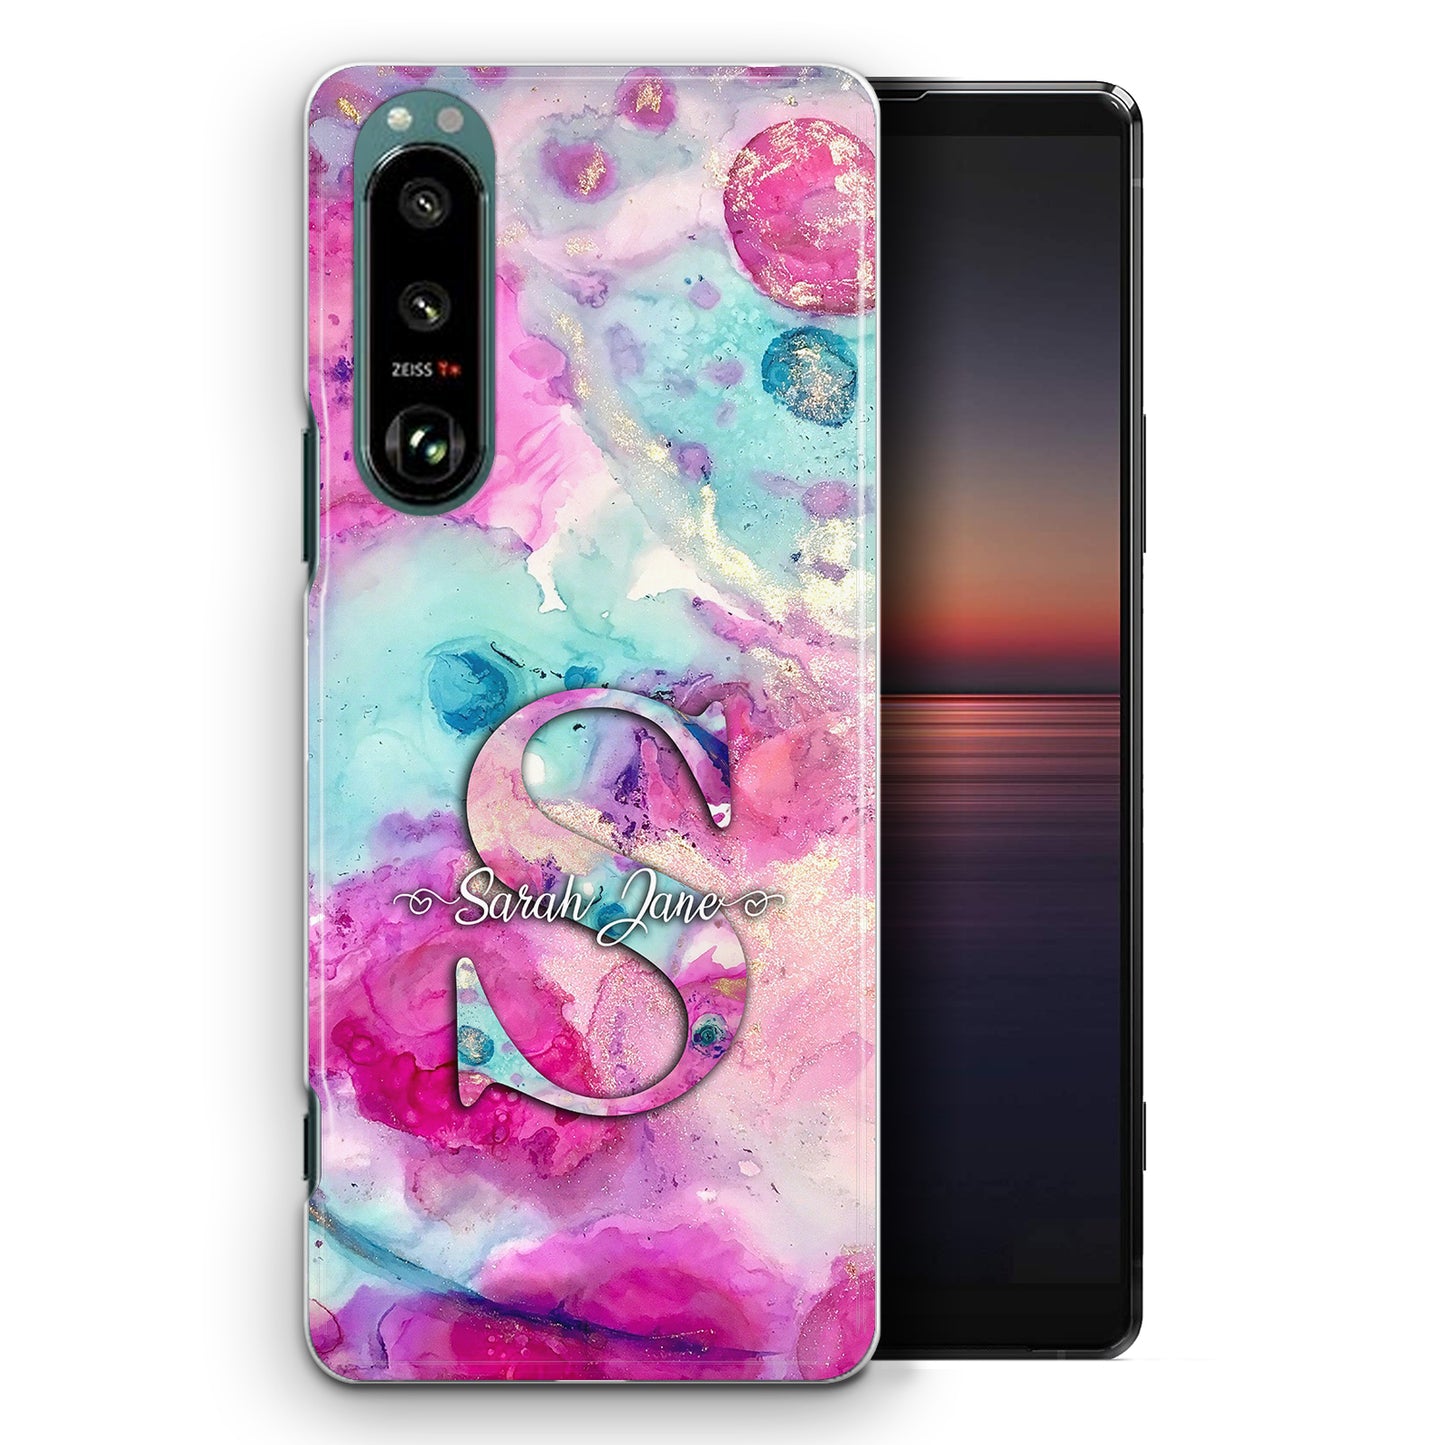 Personalised Sony Phone Hard Case with Textured Monogram and Name on Pink Swirl Marble